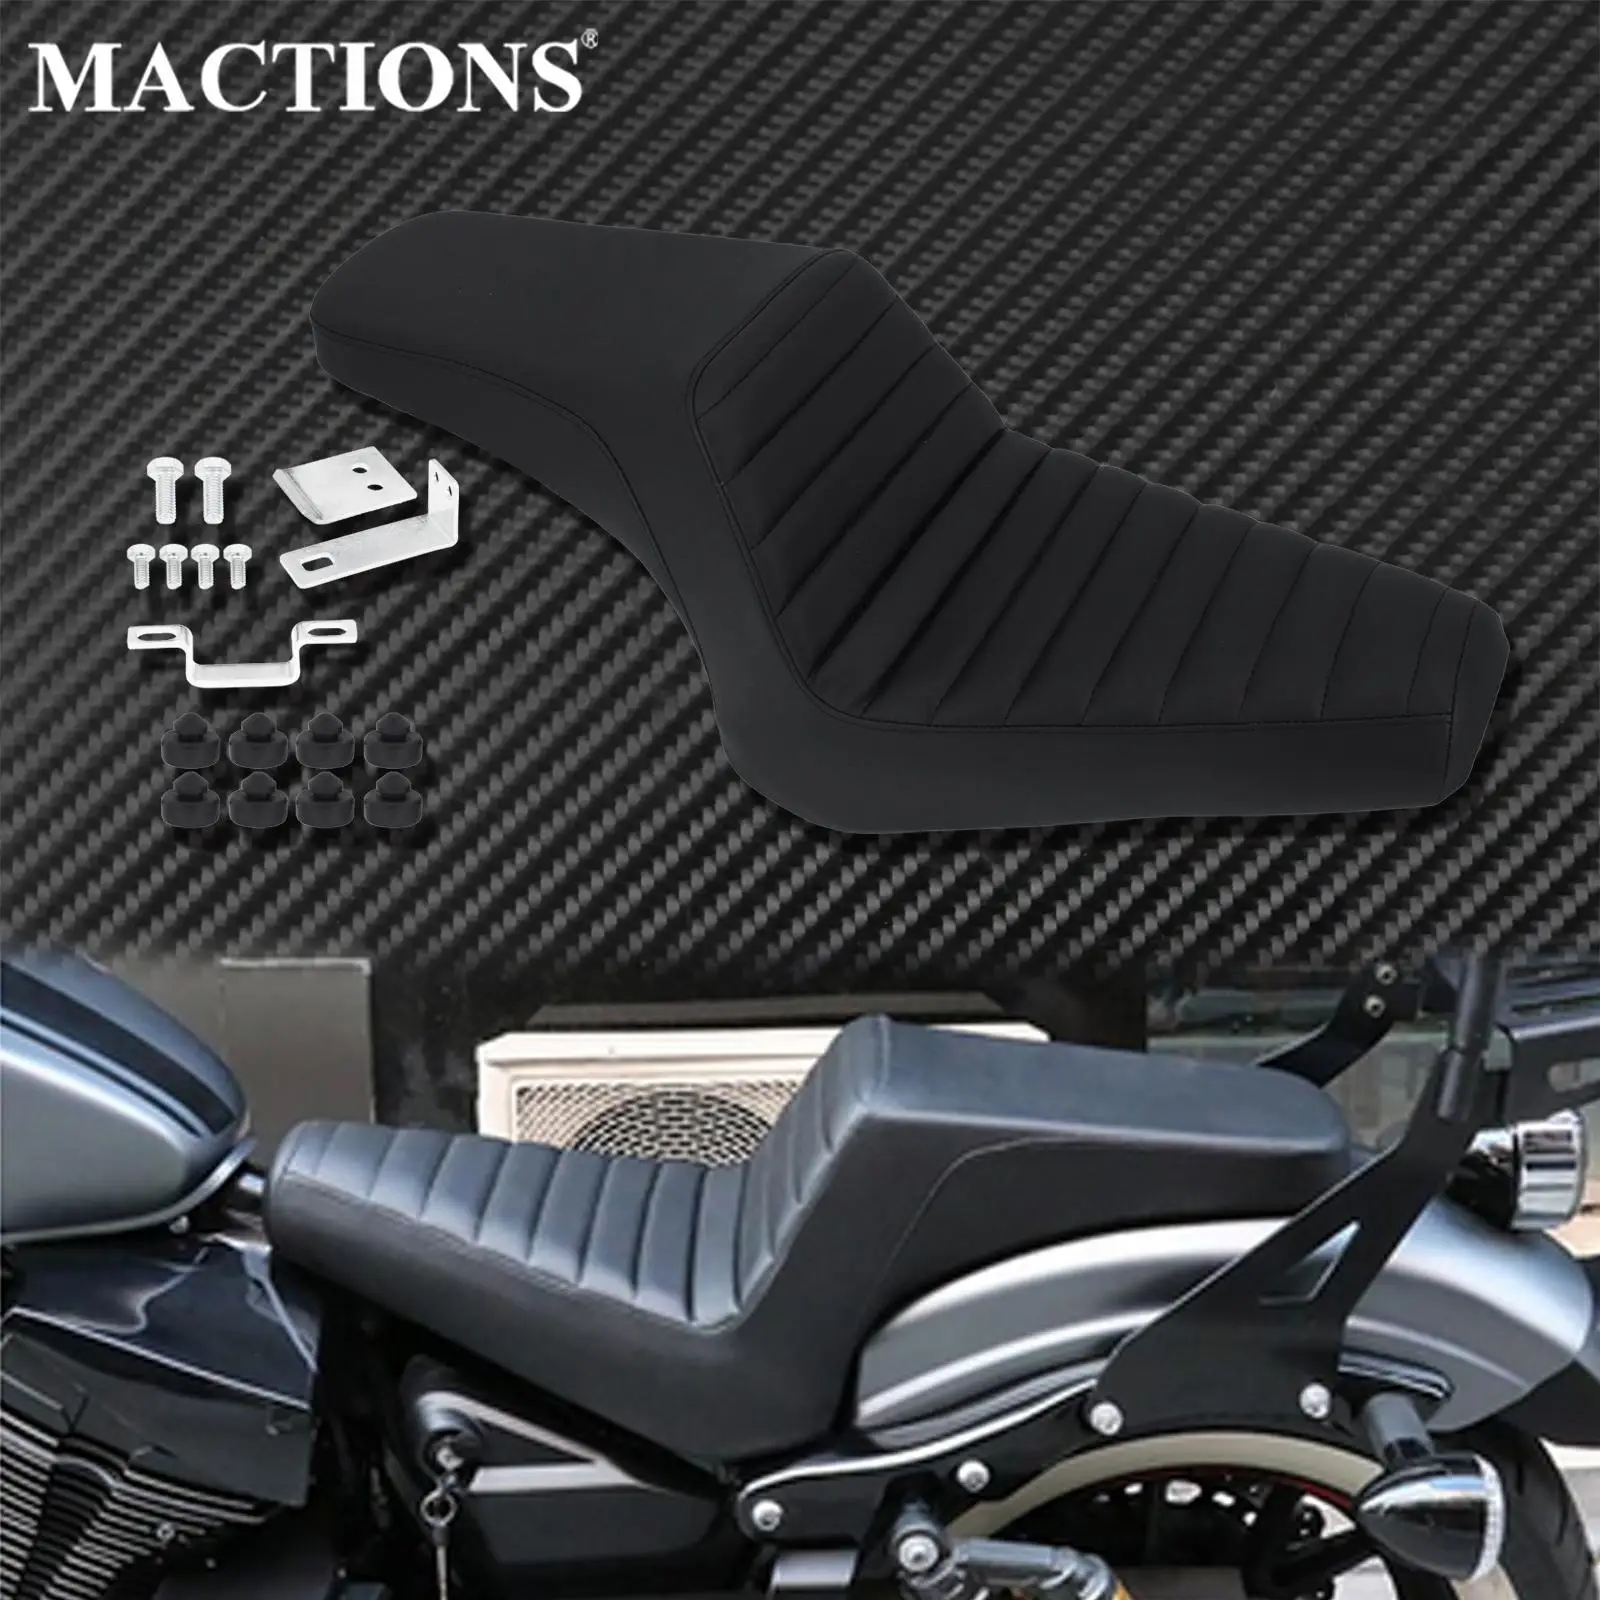 

Motorcycle Two Up Driver Front Rear Passenger Seat Covers Cushion Pad Black For Yamaha Bolt 950 XV950 XVS 950 R/C SPEC 2013-2019